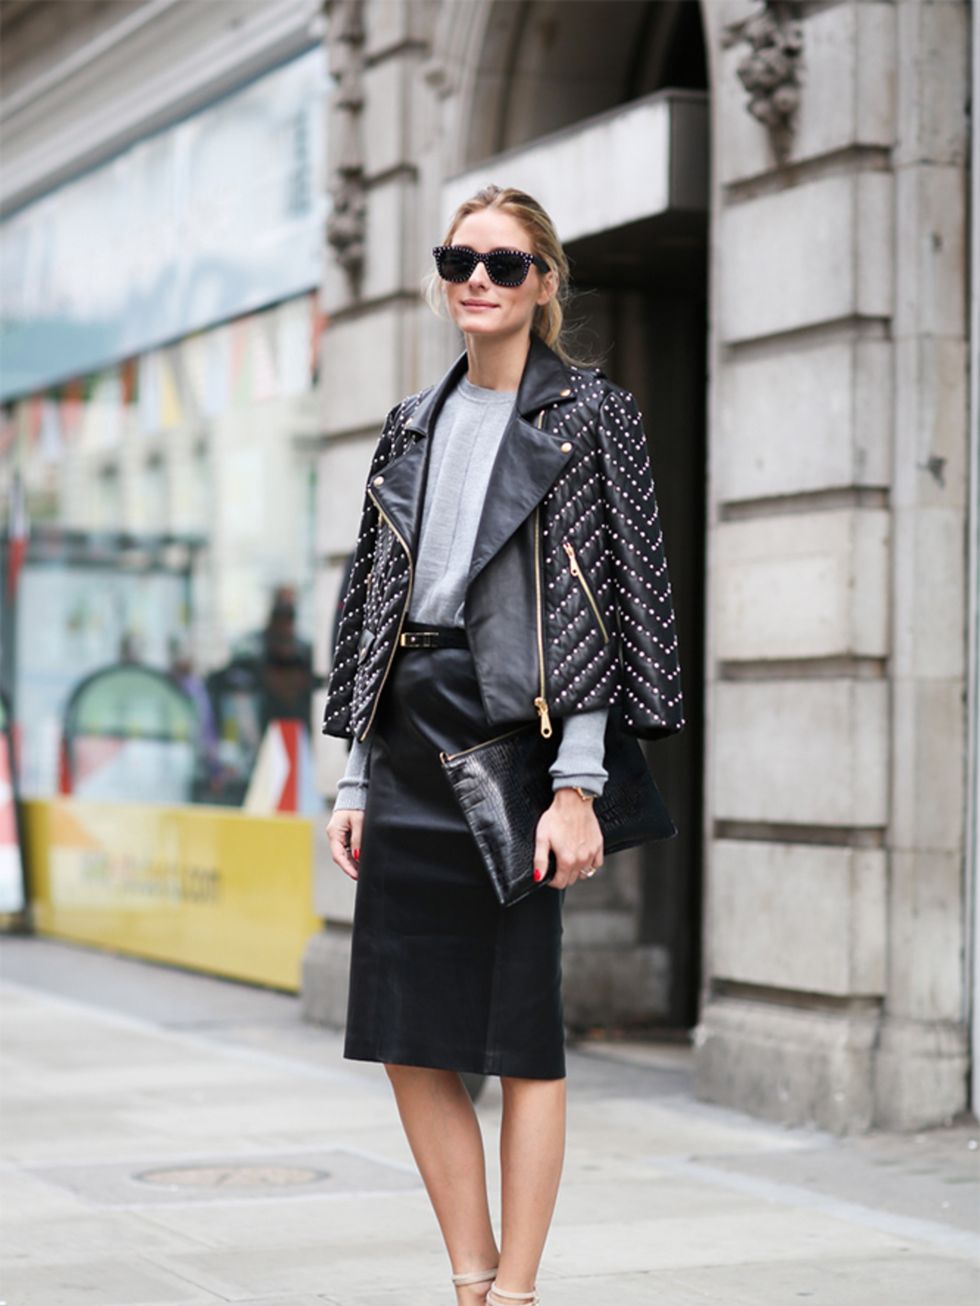 Olivia Palermo wears Rebecca Minkoff jacket, Willow skirt, Whistles bag and Gianvito Rossi shoes.